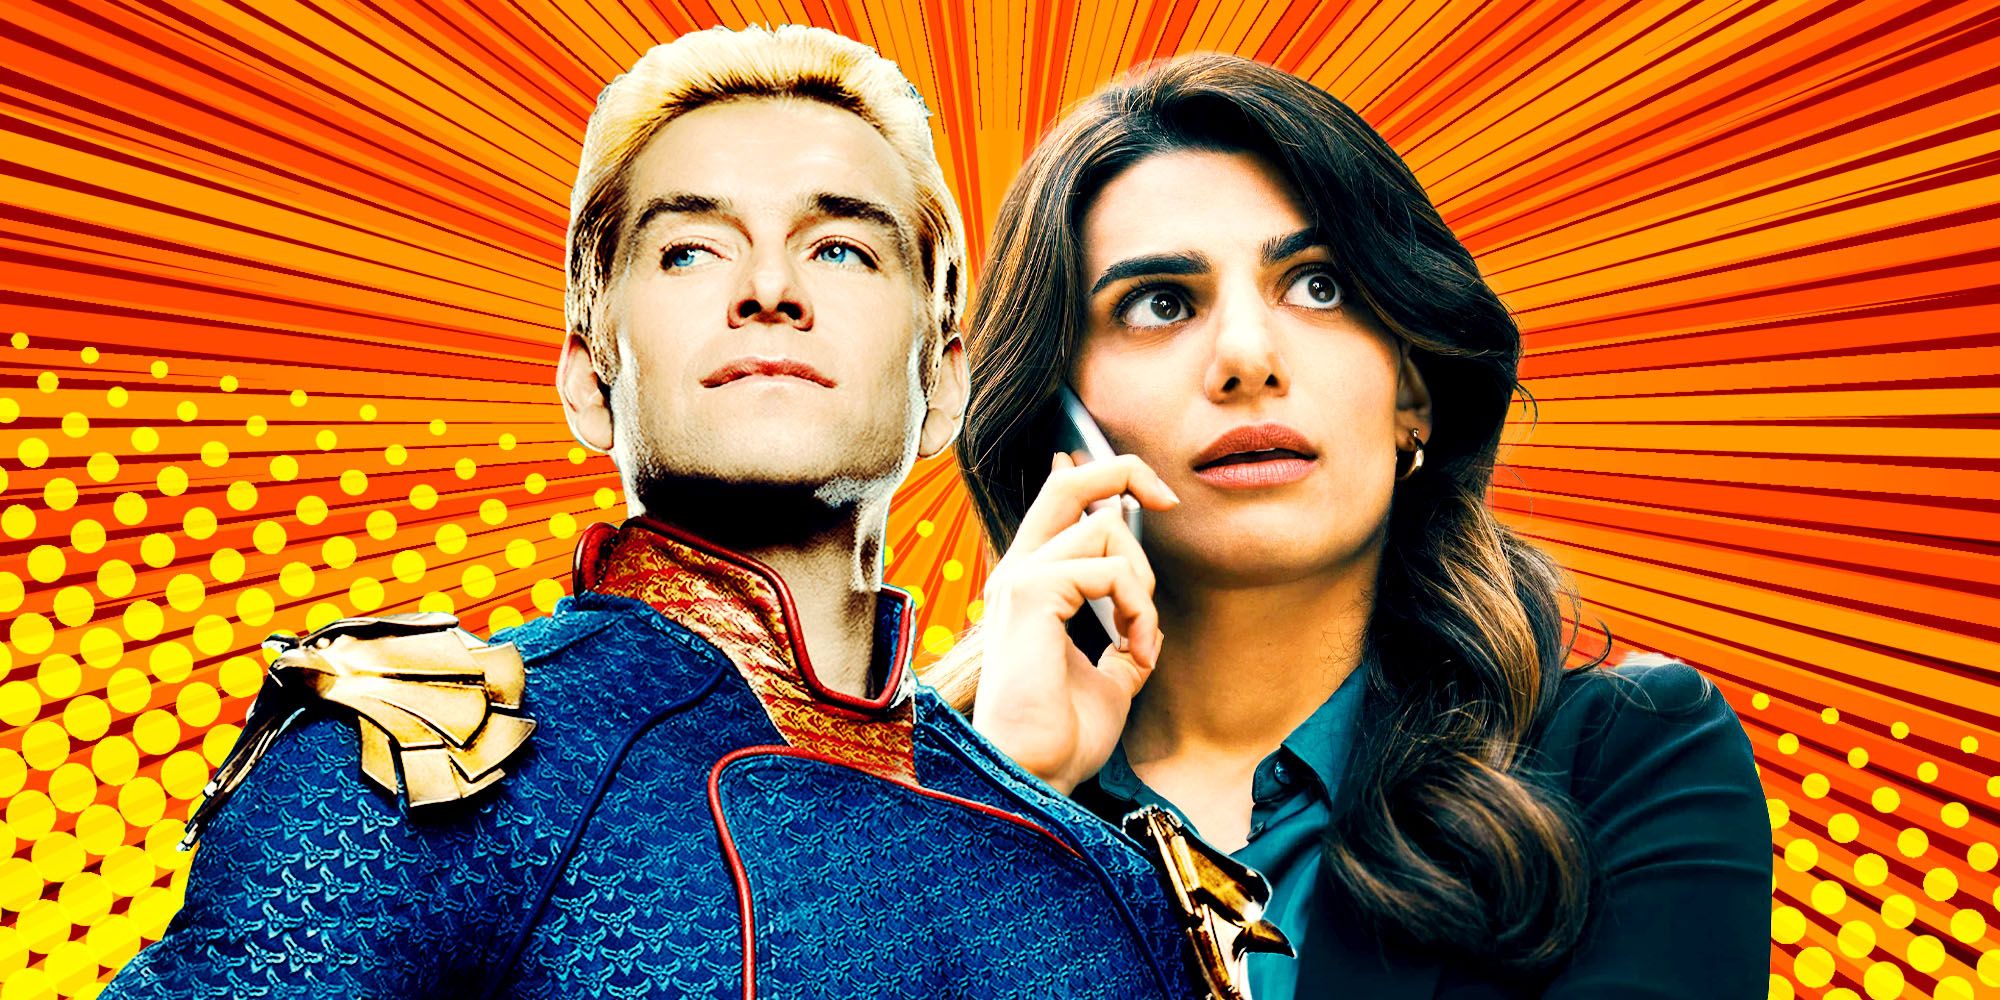 Antony Starr as Homelander and Claudia Doumit as Victoria Neuman in The Boys